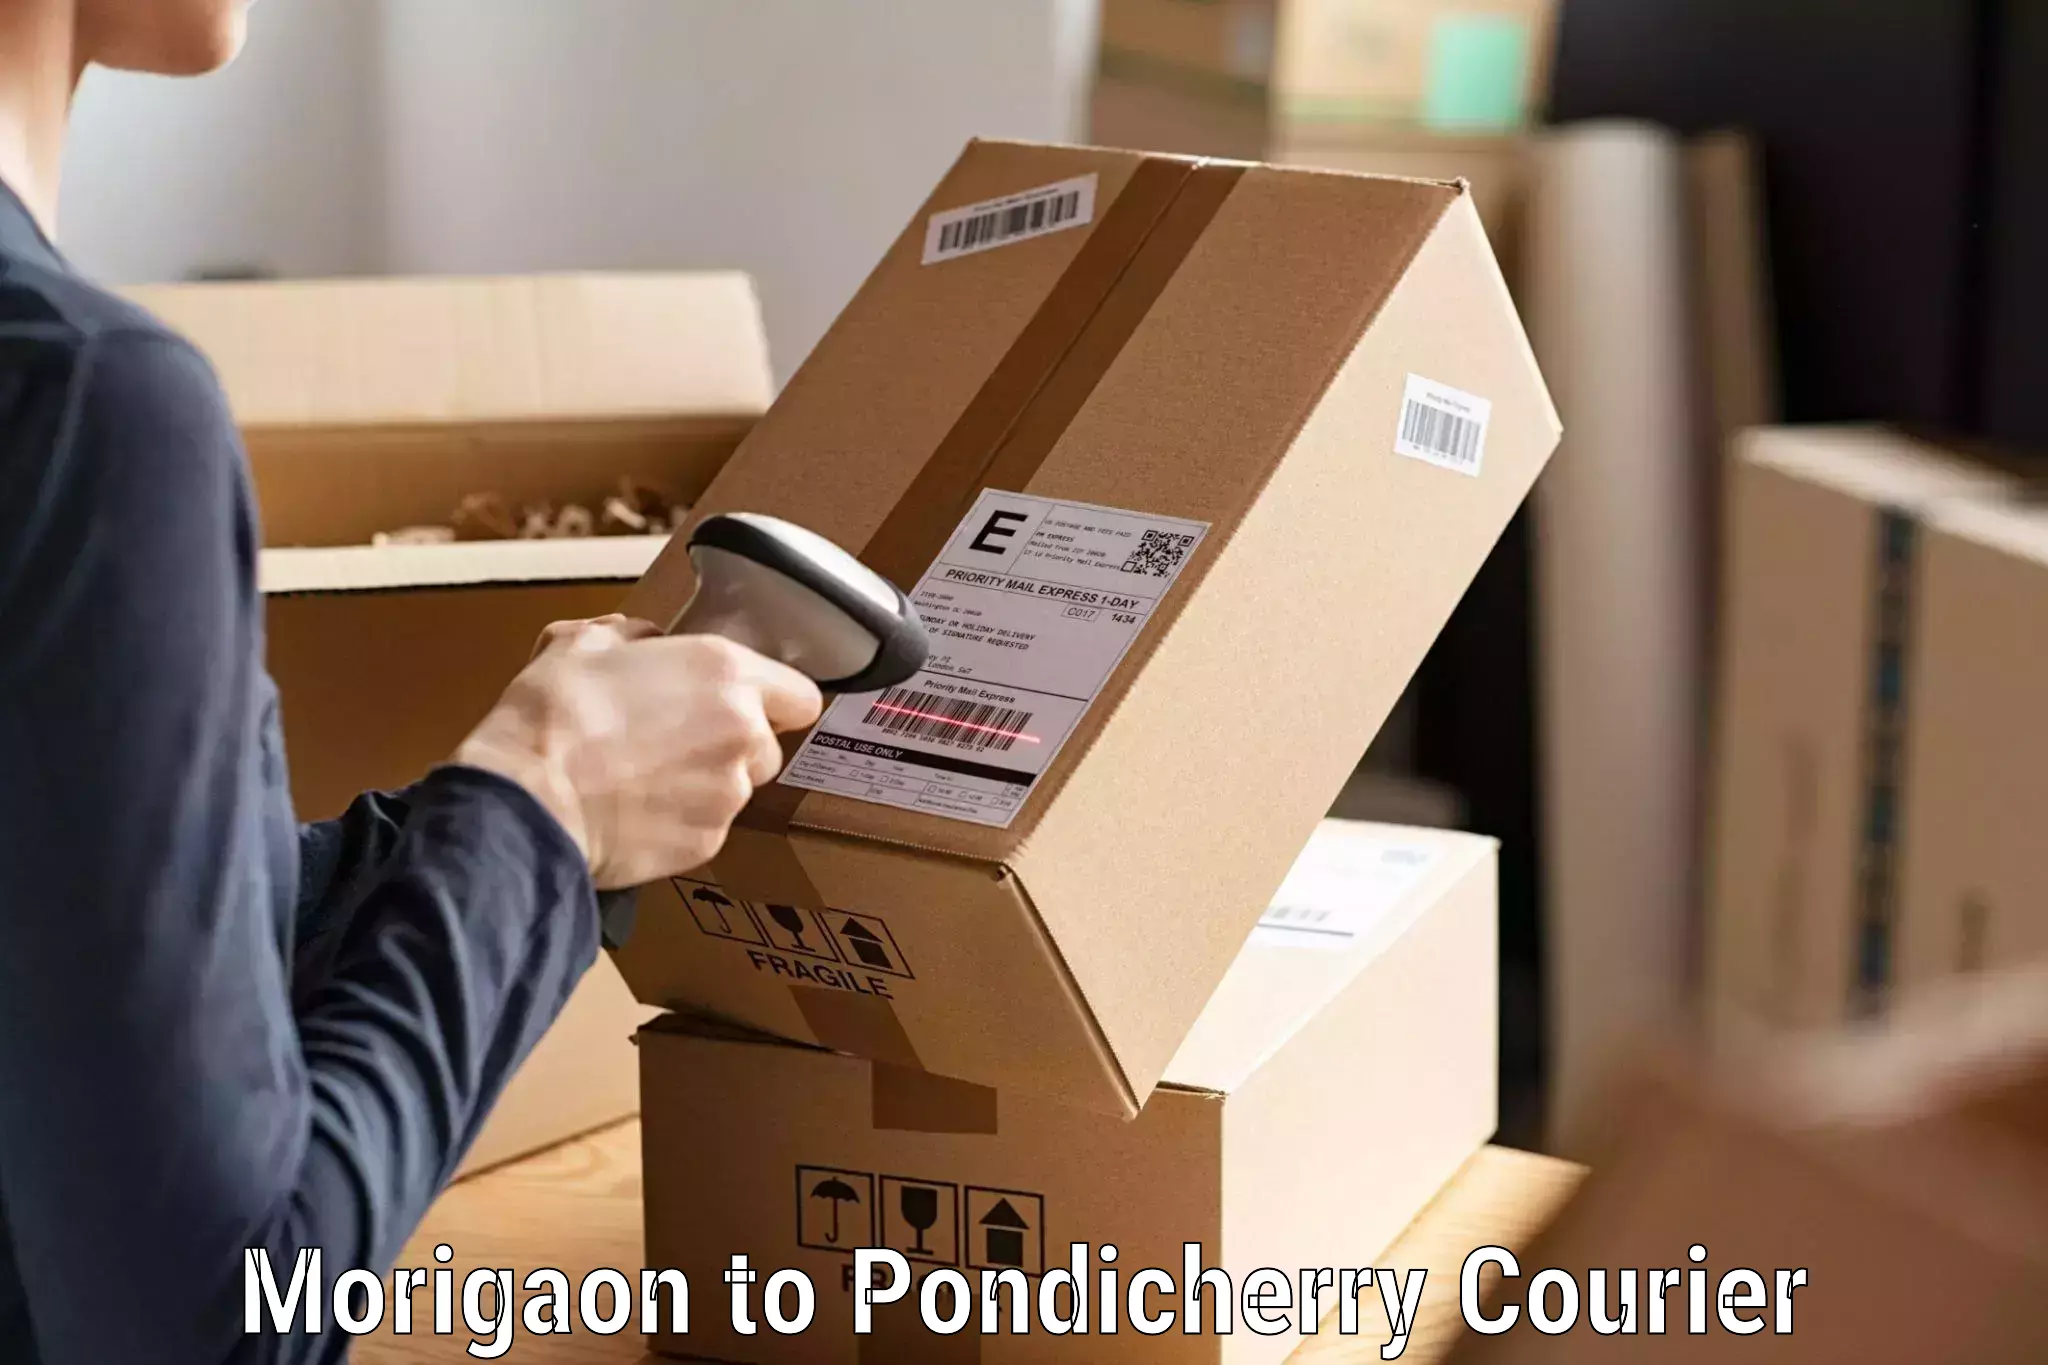 Parcel handling and care Morigaon to Pondicherry